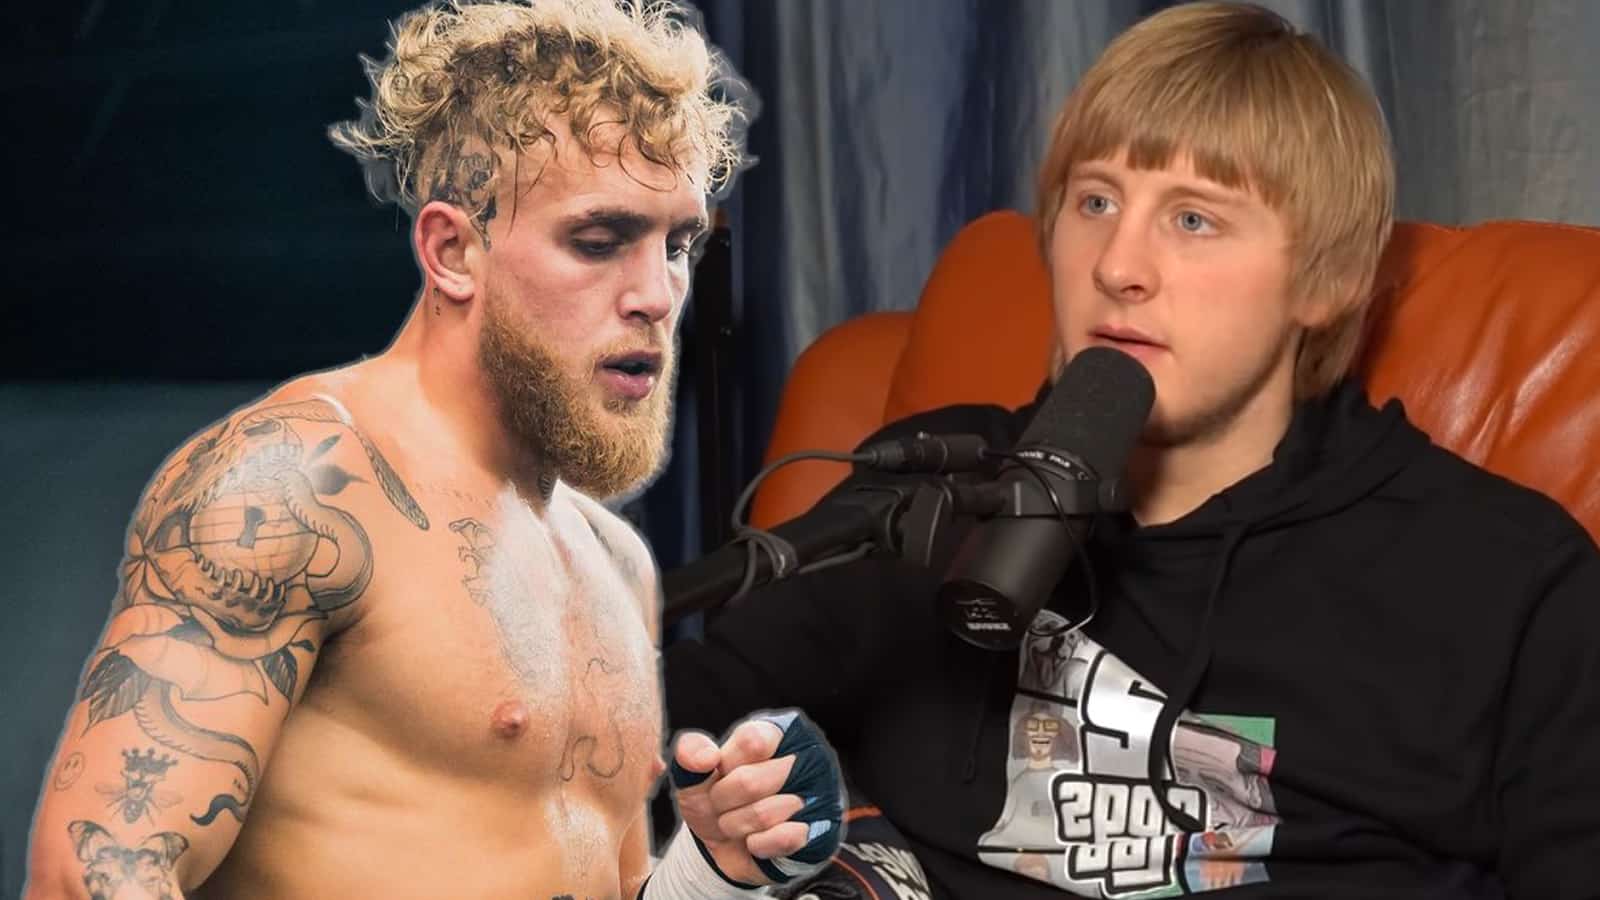 UFC star Paddy Pimblett claims Jake Paul “wouldnt have the balls” to fight in MMA